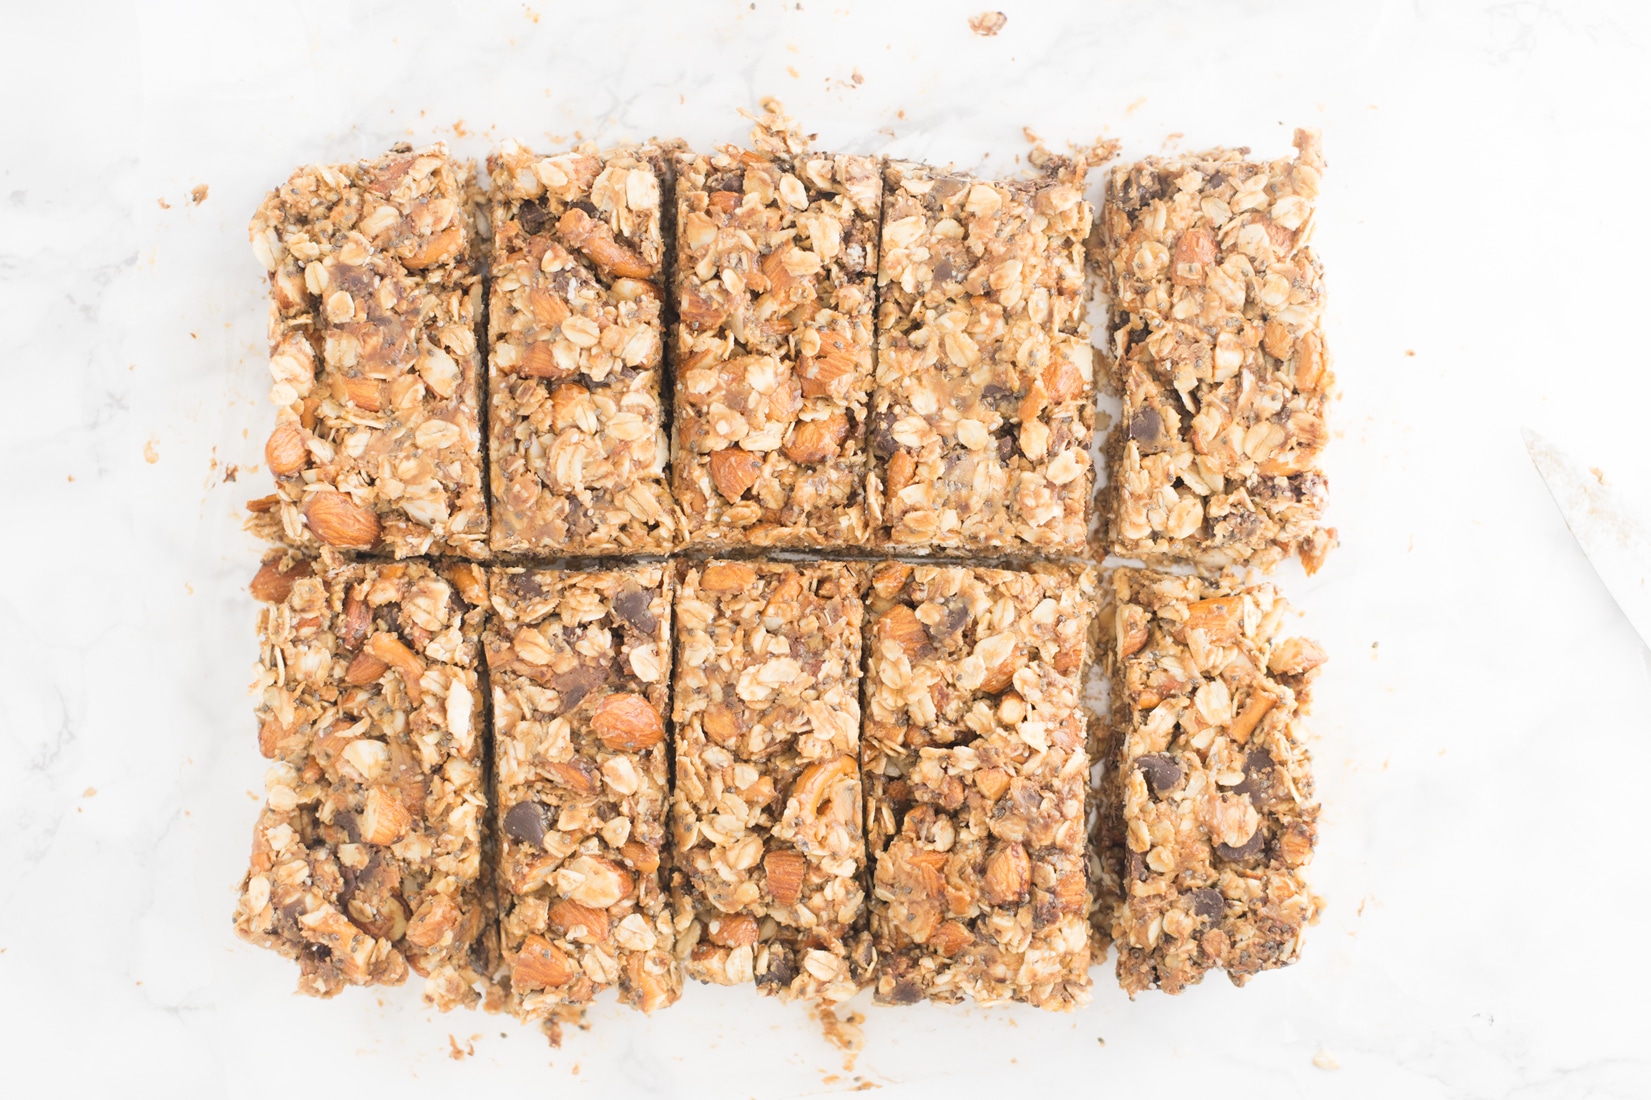 Chocolate Peanut Butter Pretzel Granola Bars -- This granola bar recipe is naturally vegan and gluten free and is packed with healthy ingredients. This takes snacking to a whole new level! - mindfulavocado